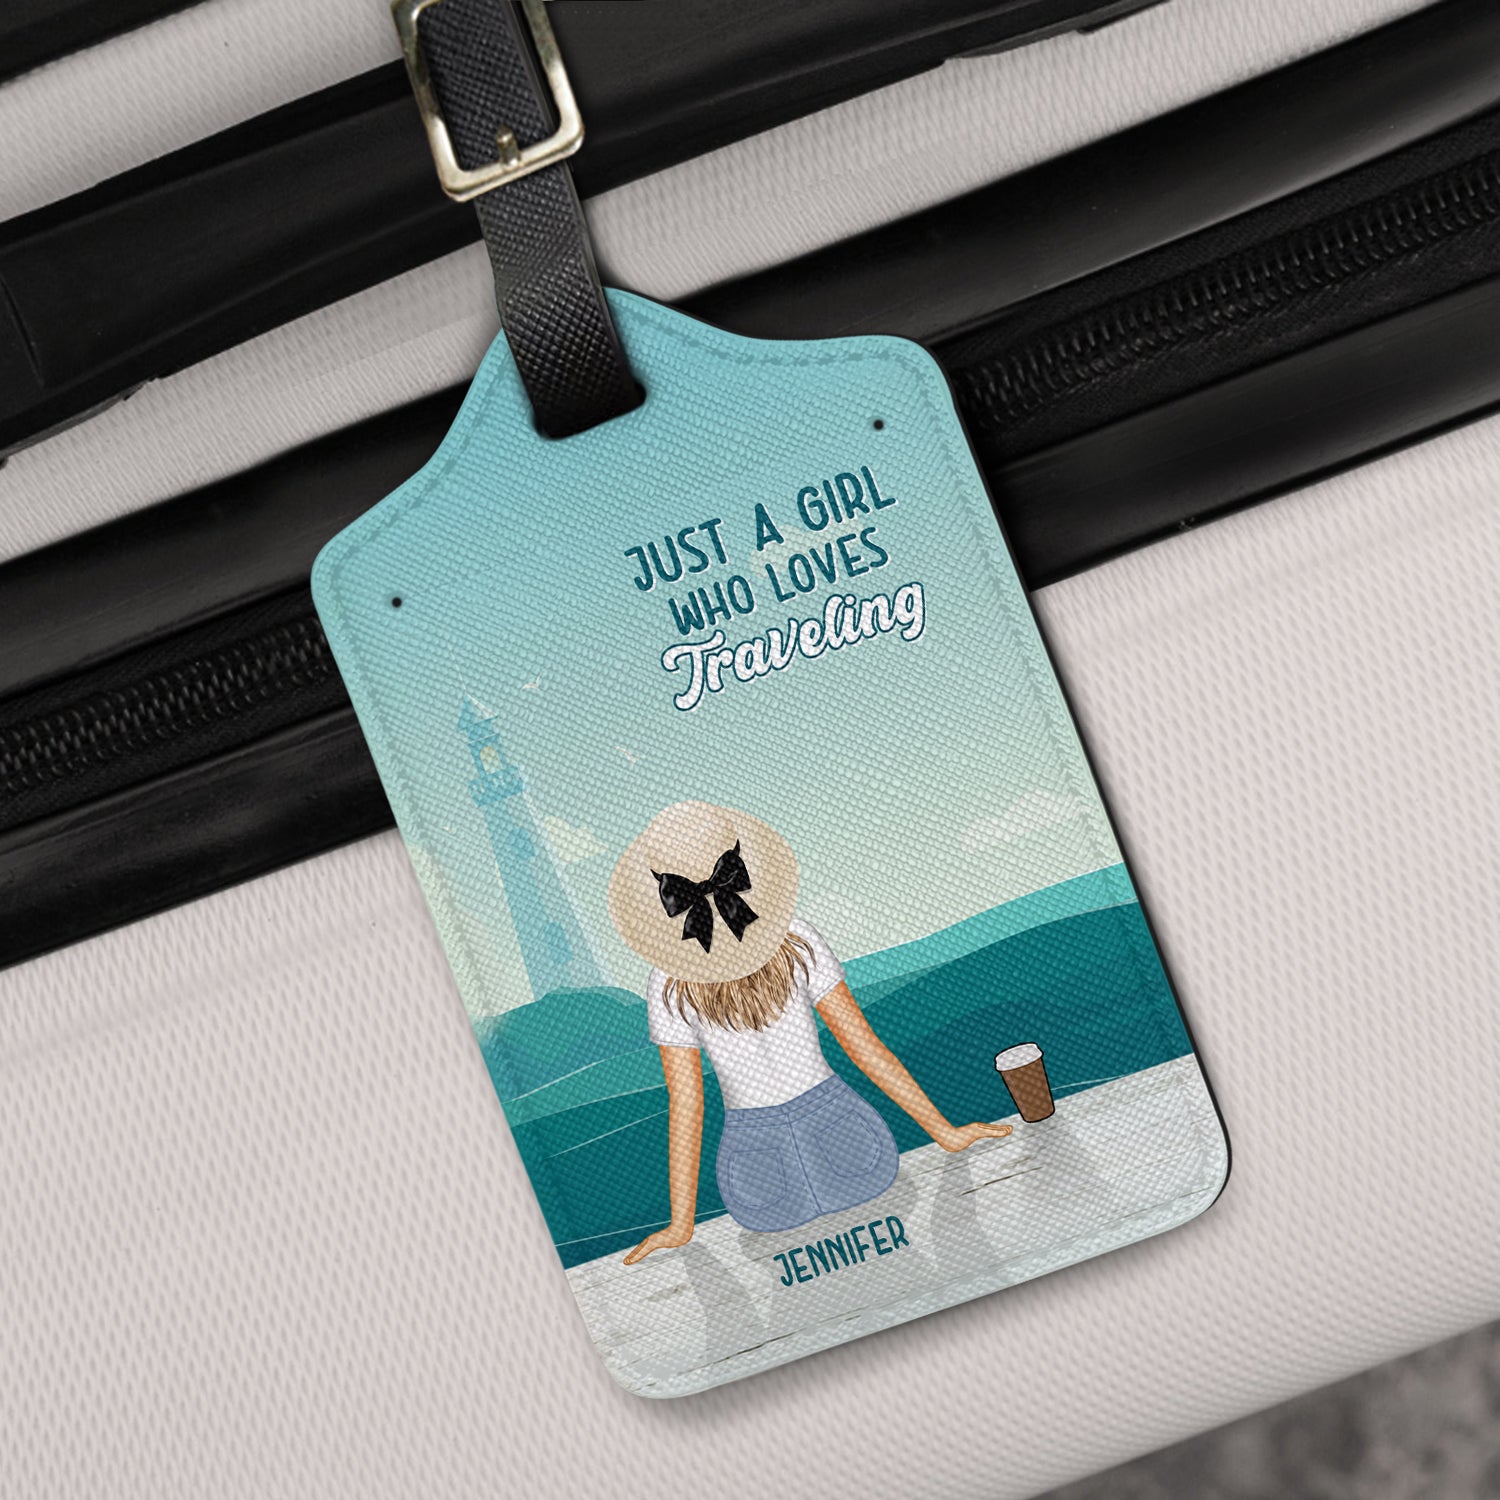 Just A Girl - Summer Gift For Girl - Personalized Luggage Tag